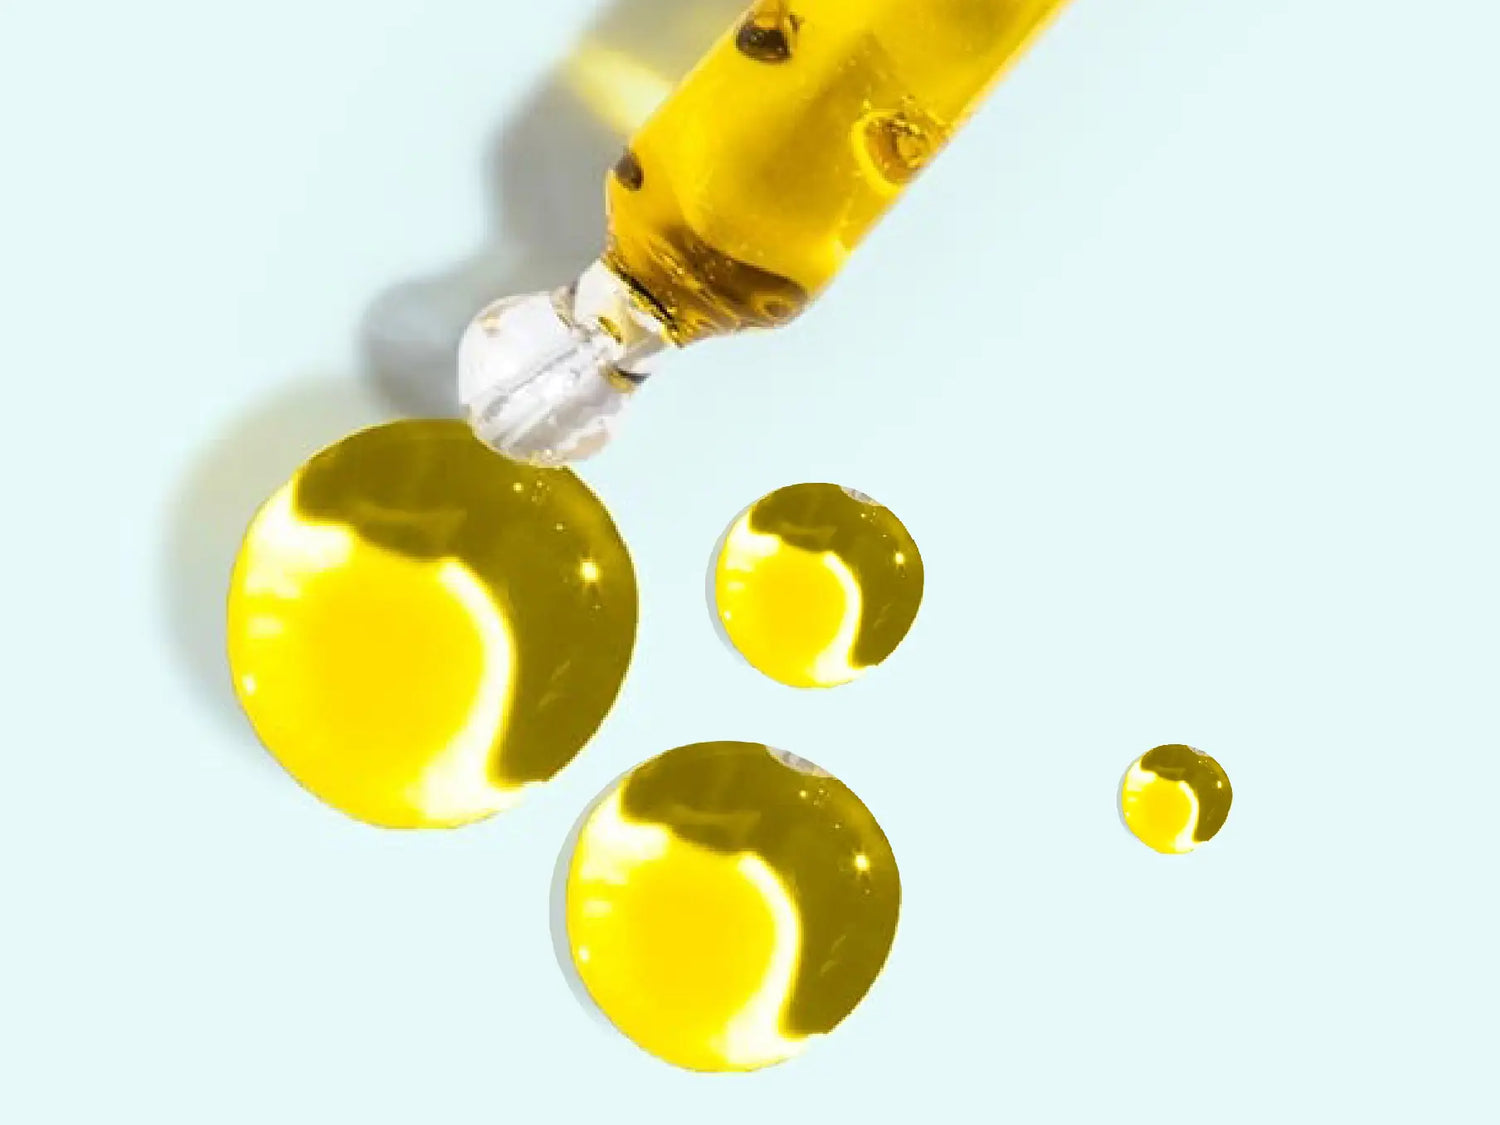 Pipette and oil drops showing the golden color of the CBD oil